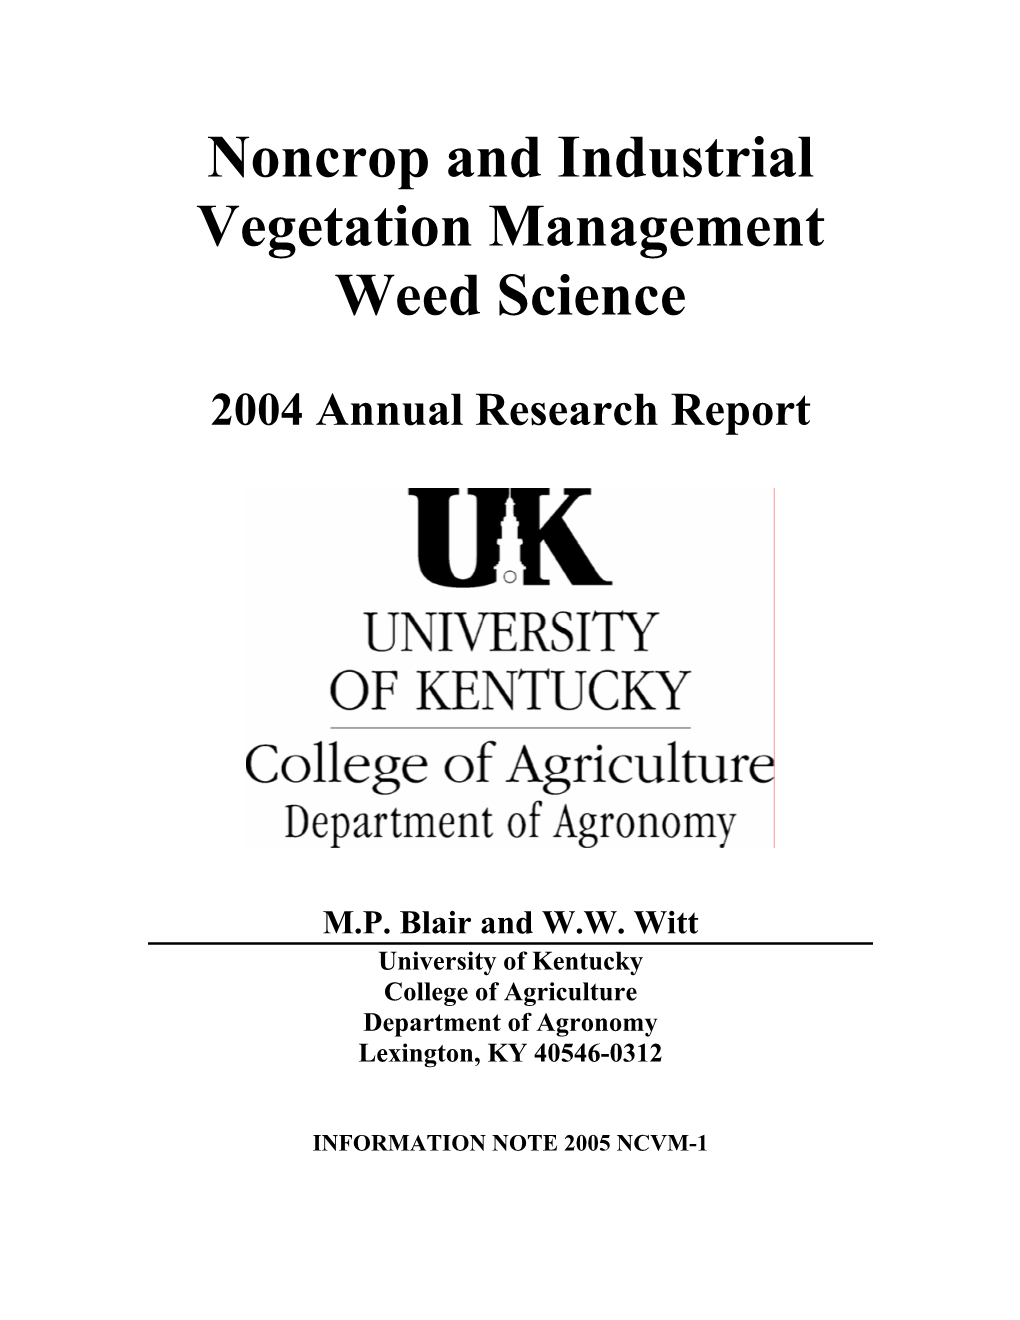 Noncrop and Industrial Vegetation Management Weed Science